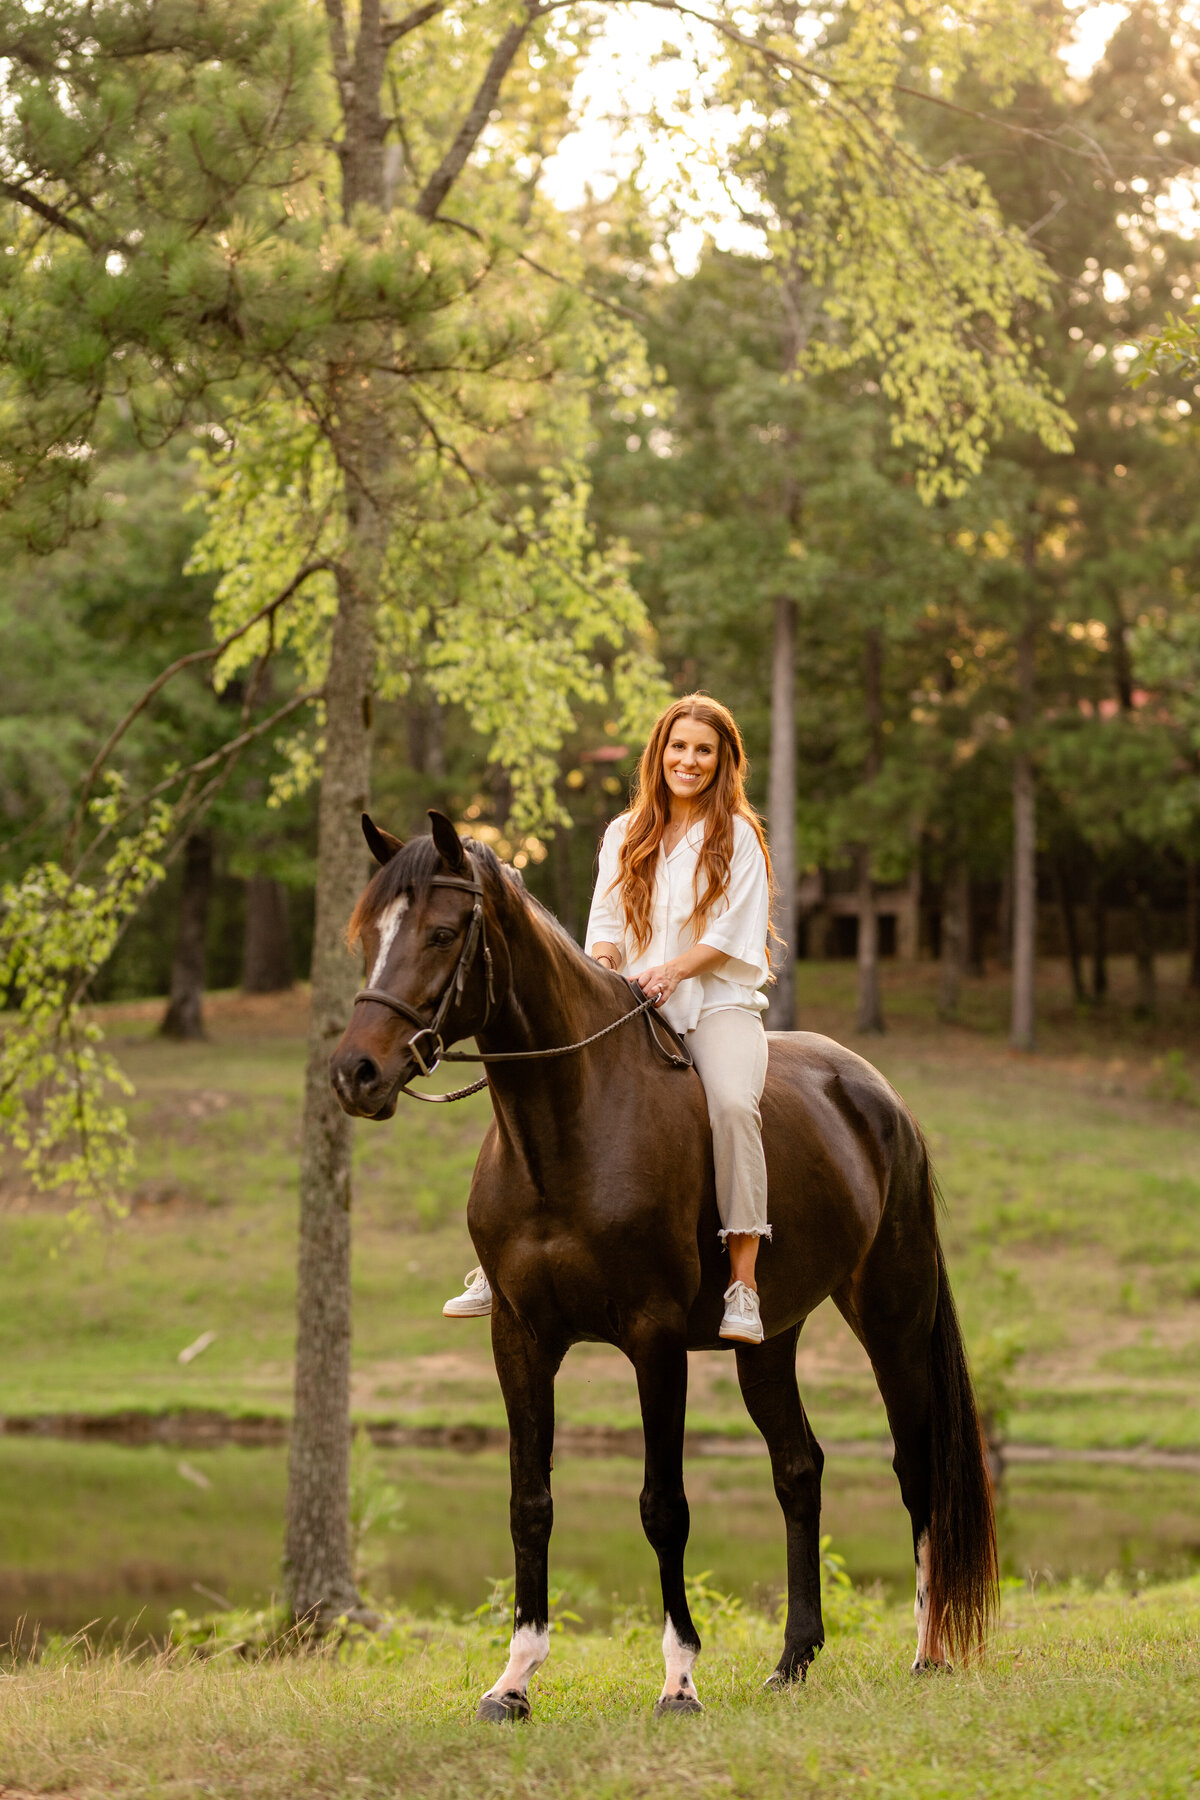 Equestrian takes pictures with her horse in Alabama.